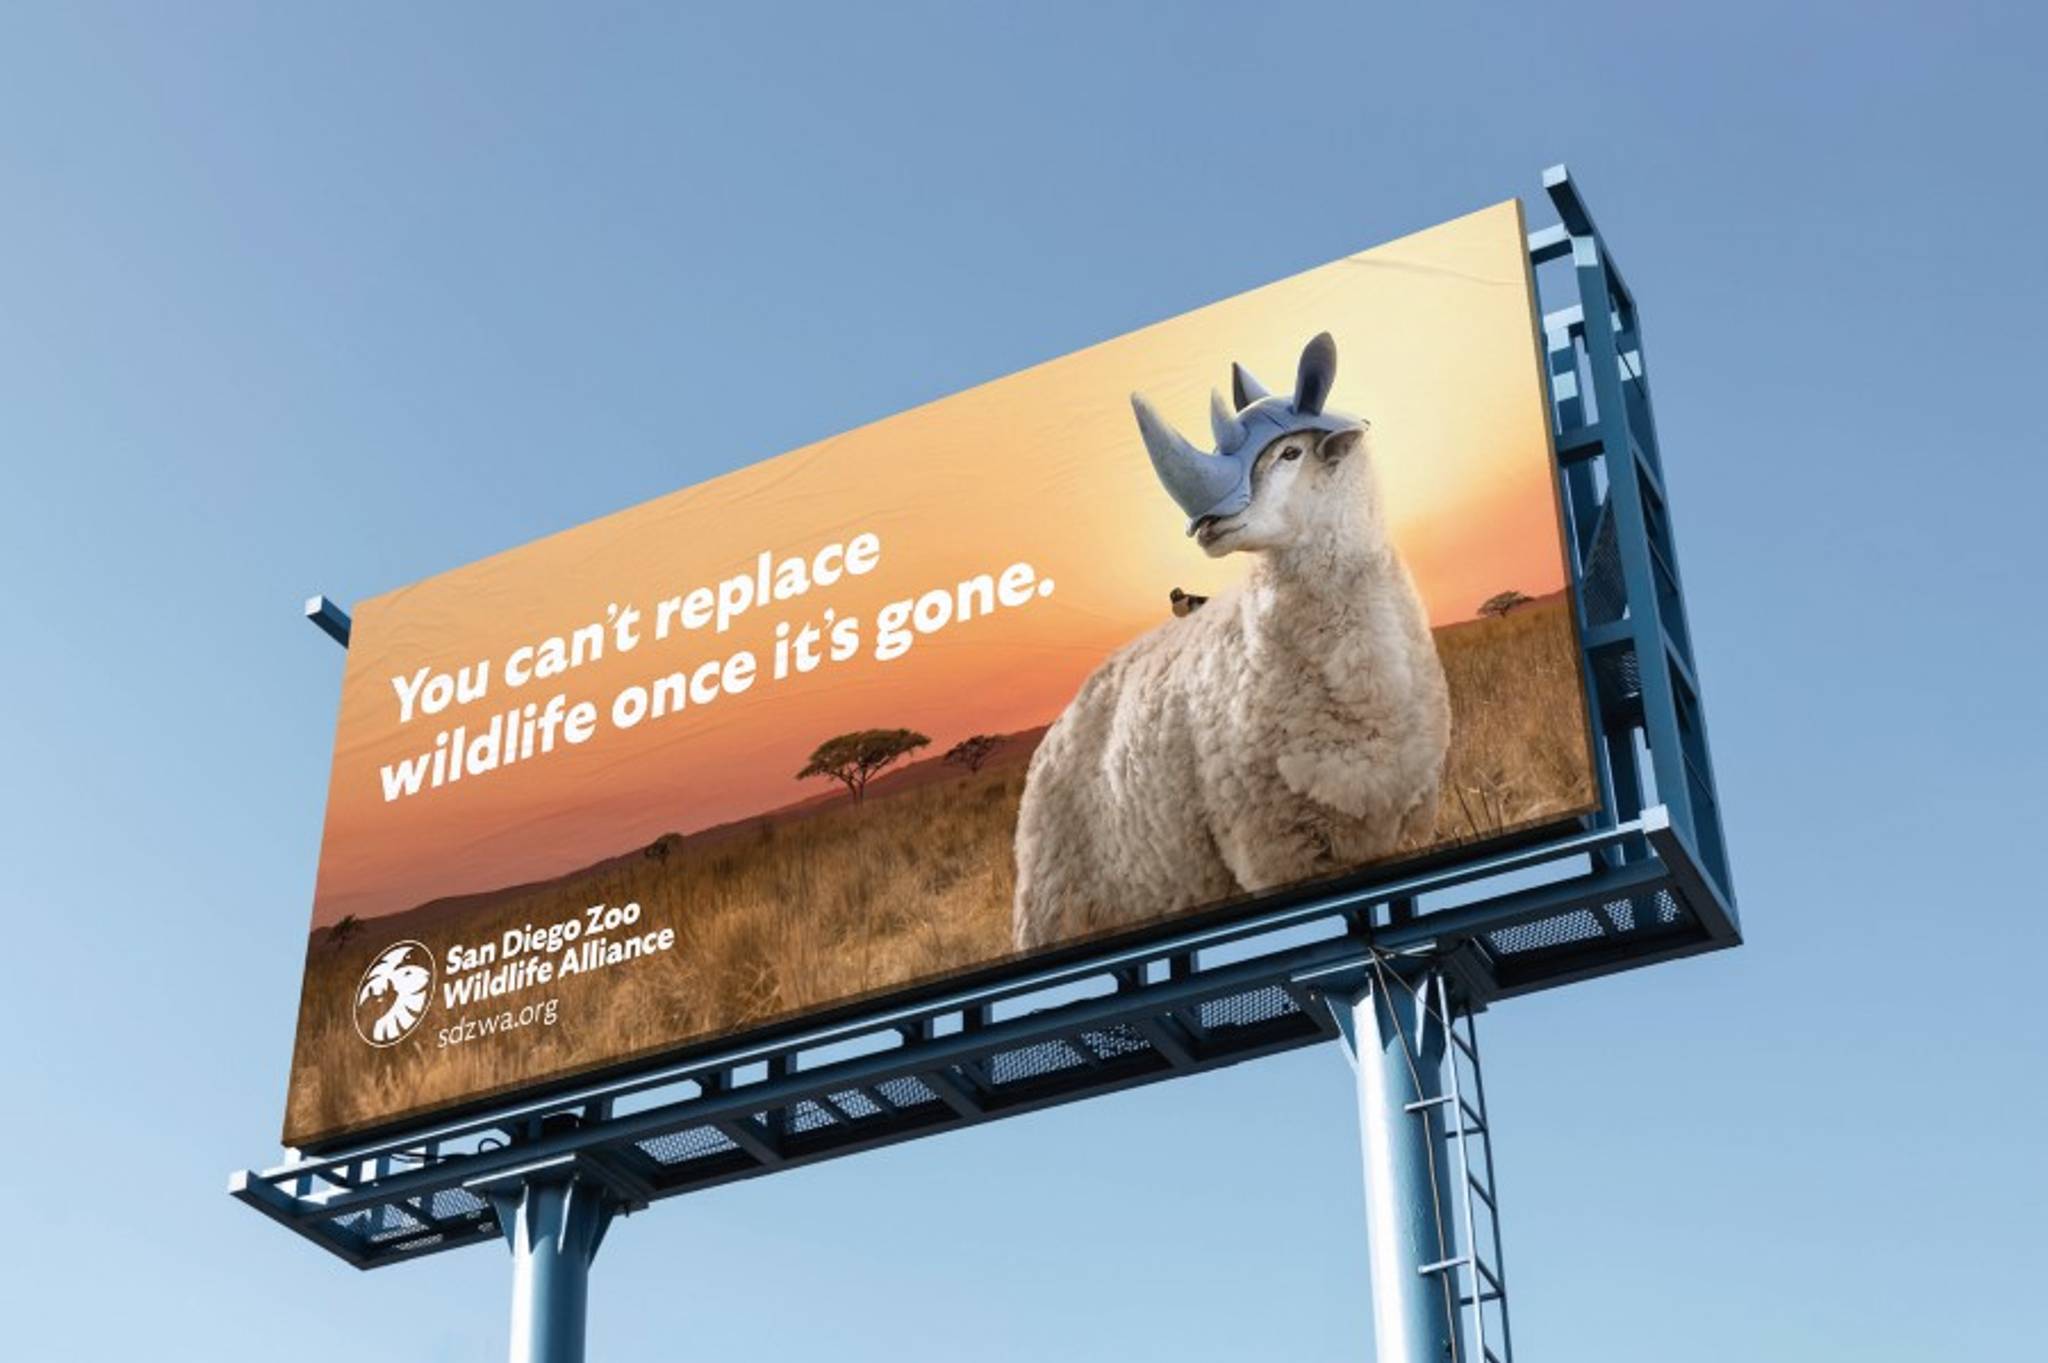 Conservation campaign uses humor to drive action